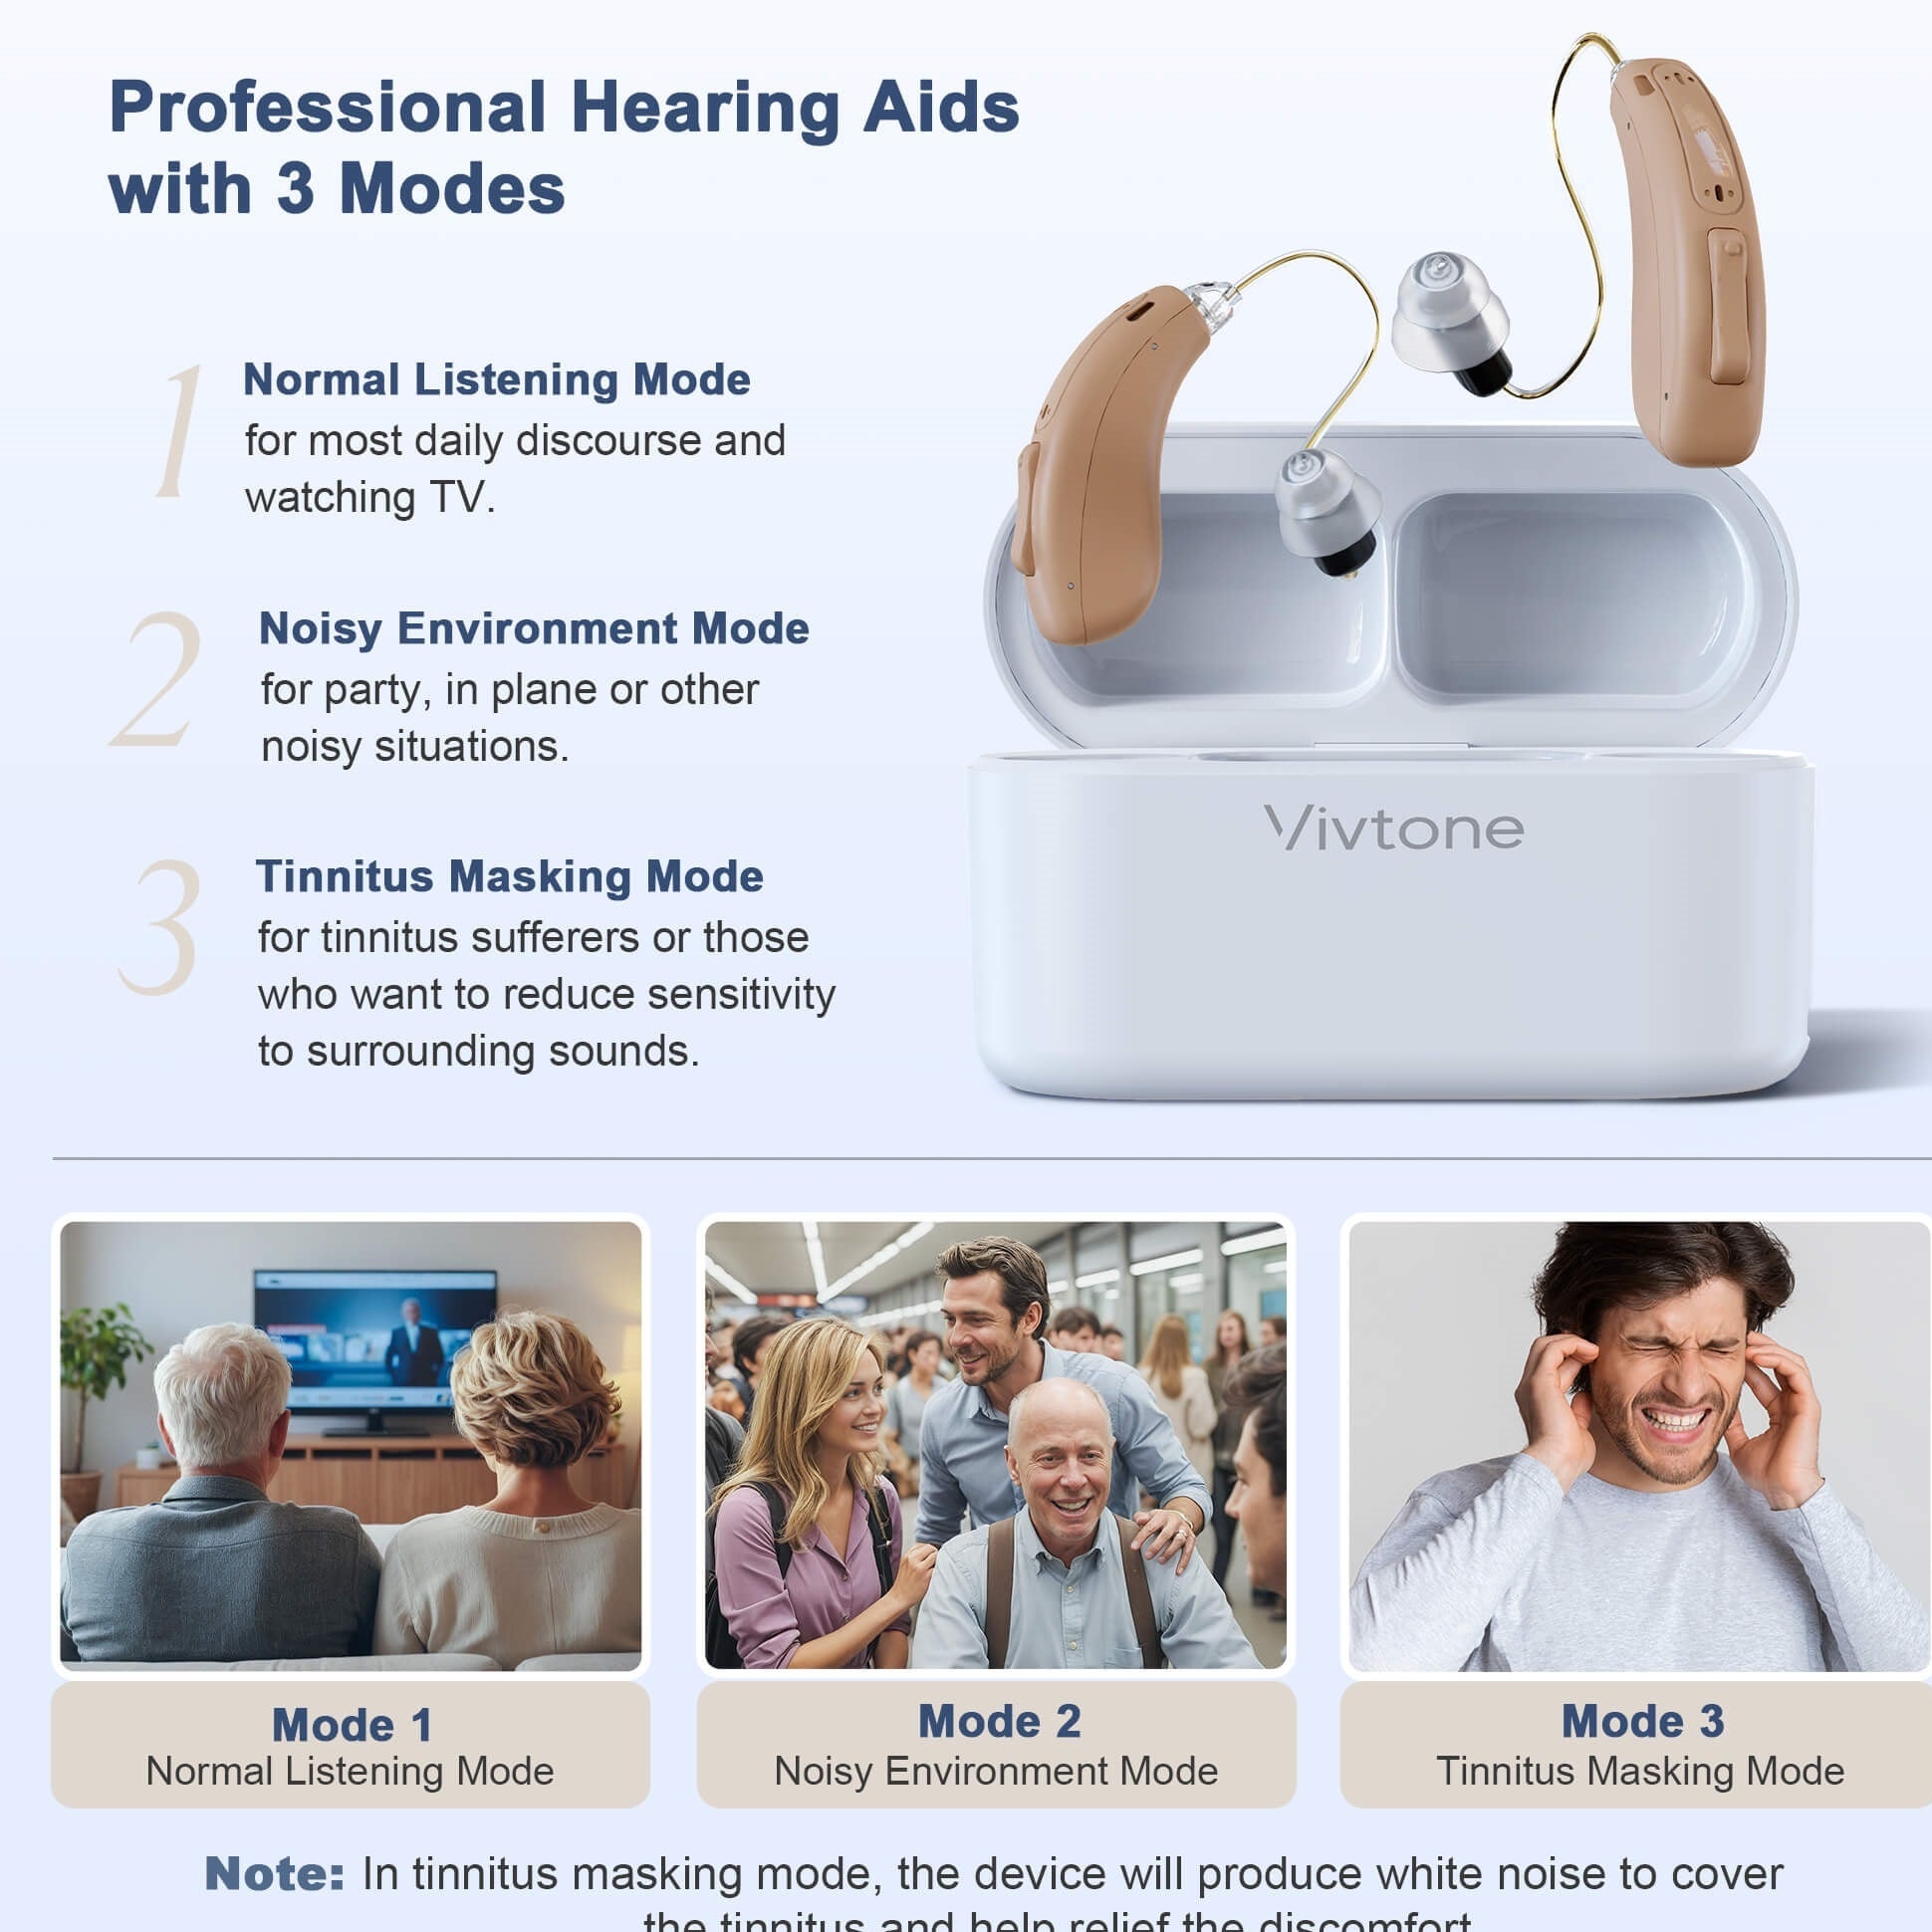 Best Hearing Aids for Tinnitus - Vivtone Lucid516 RIC-a2: In Ear Design, Medical Grade, Top Rated Hearing Aids